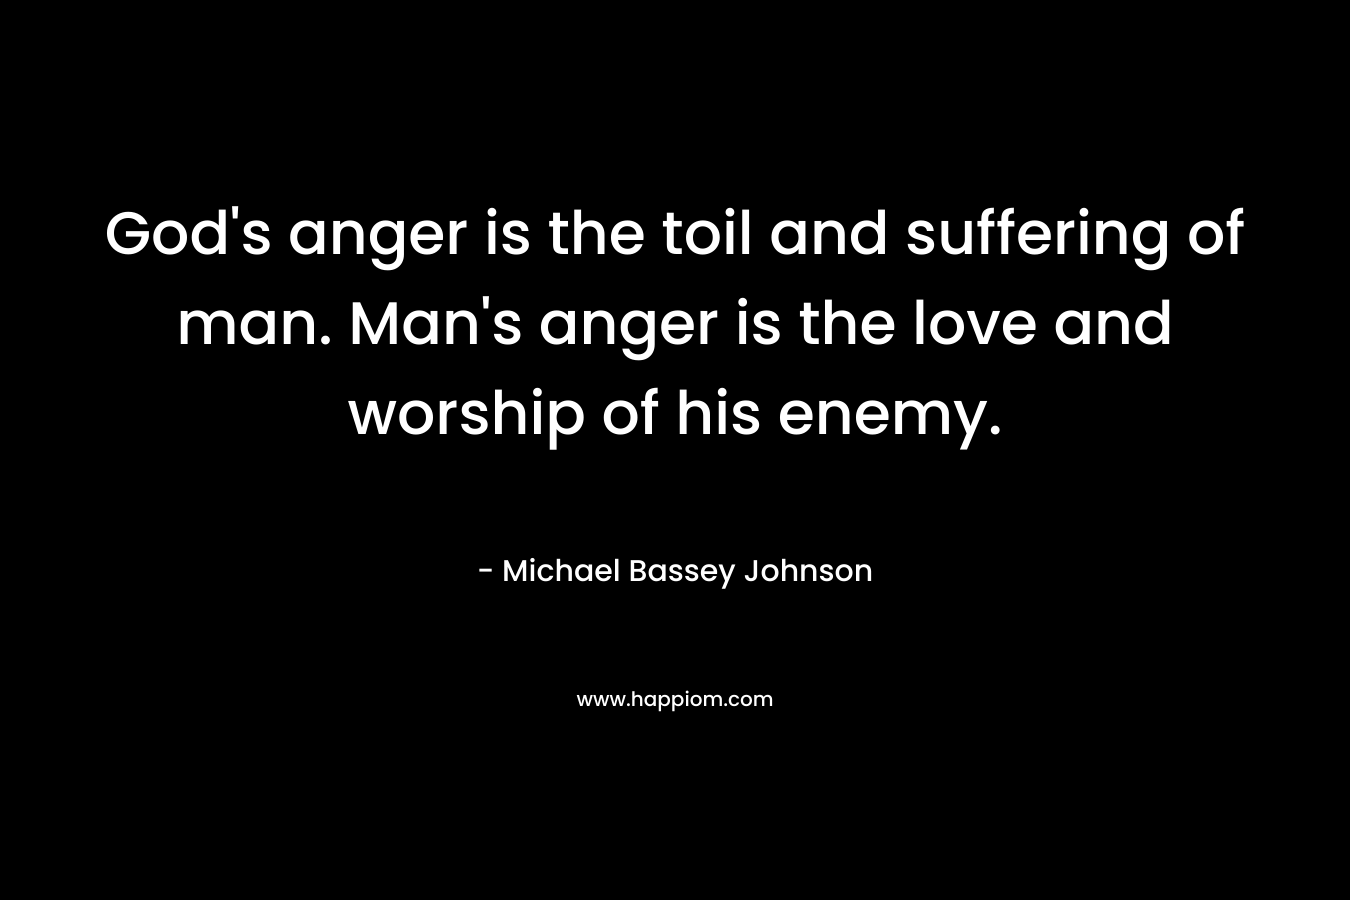 God's anger is the toil and suffering of man. Man's anger is the love and worship of his enemy.